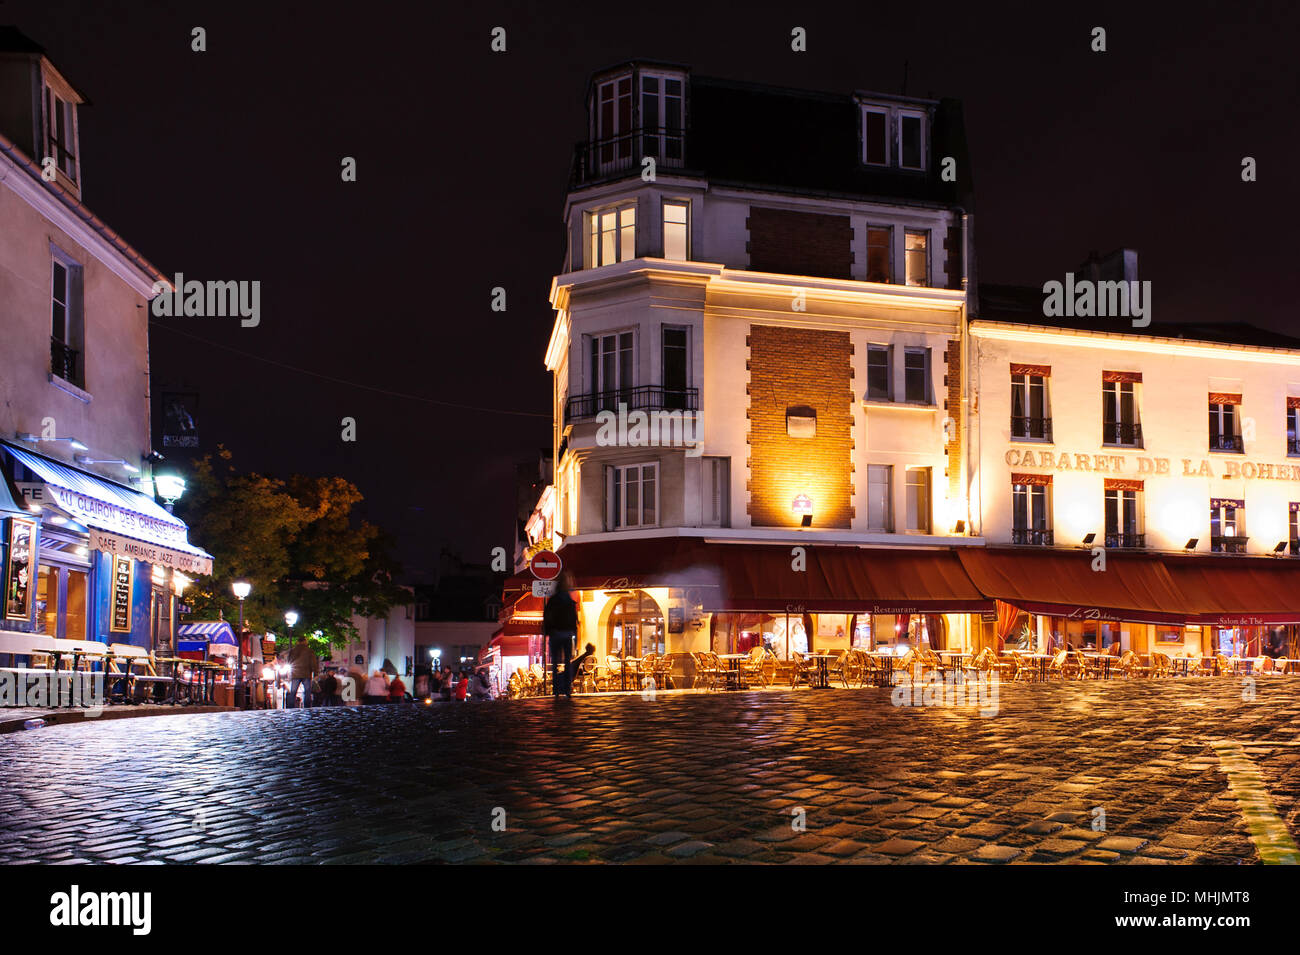 PARIS, FRANCE - 12th of OCTOBER 2012: Cafe on square in Montmartre by night. October 12th, 2012. Paris, France. Stock Photo